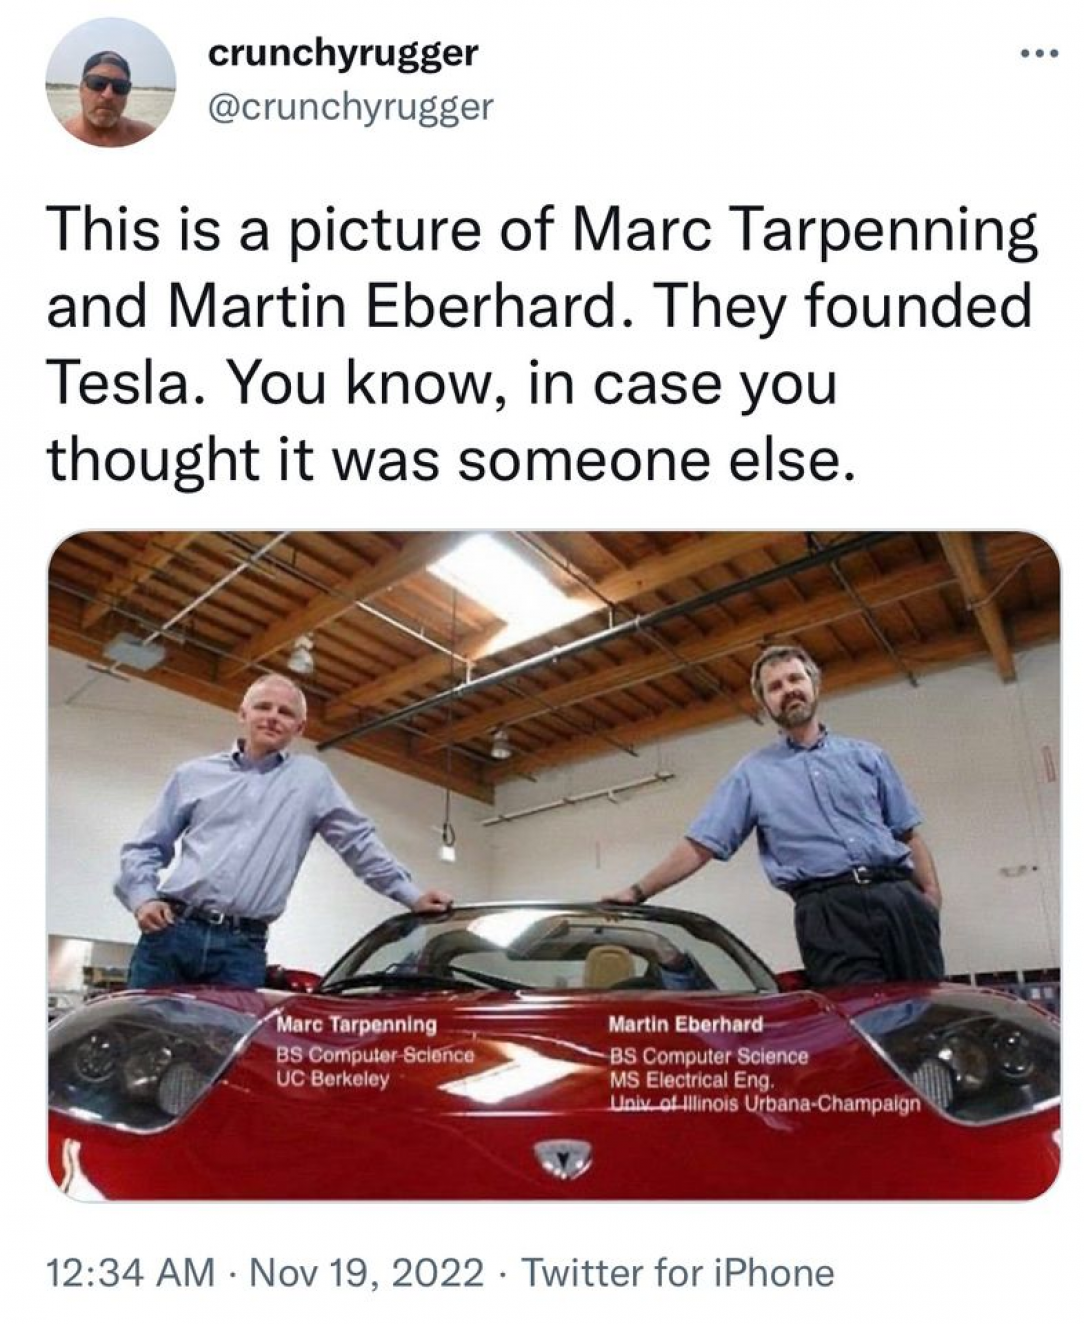 One for the Musk fanboys